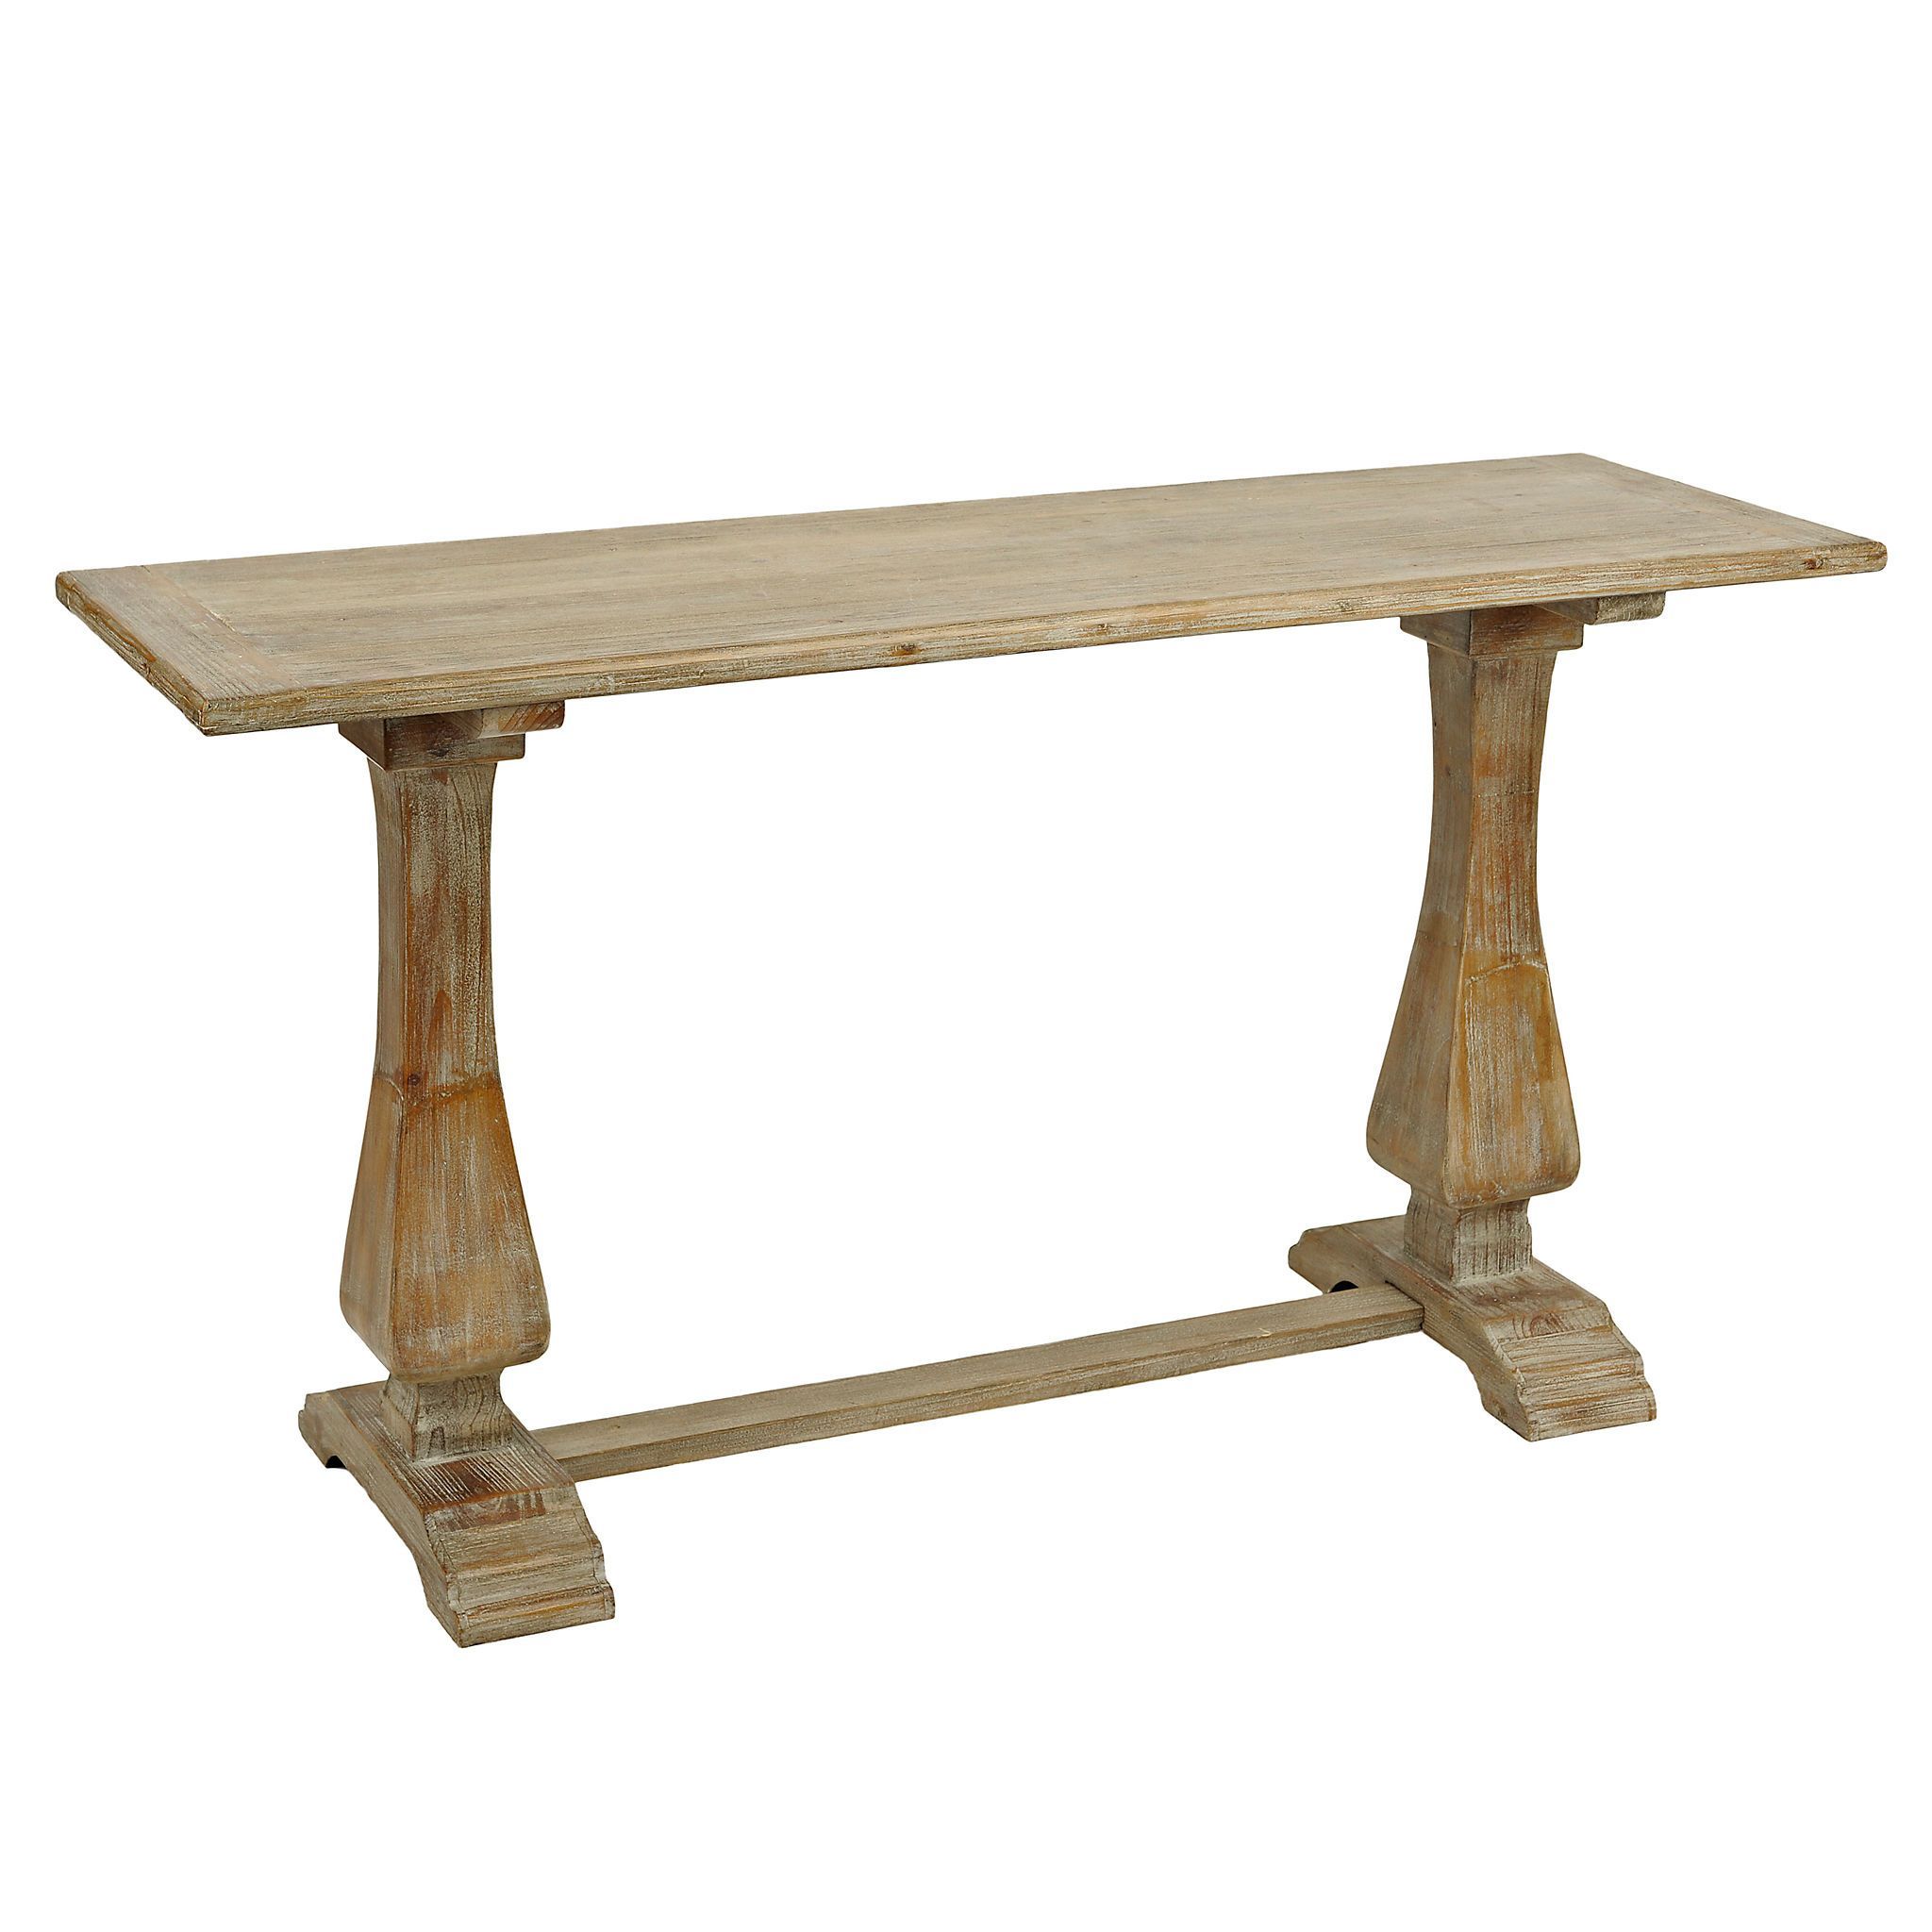 Distressed Natural Wooden Console Table | Wooden Console Table, Wooden With Regard To Natural Wood Console Tables (View 12 of 20)